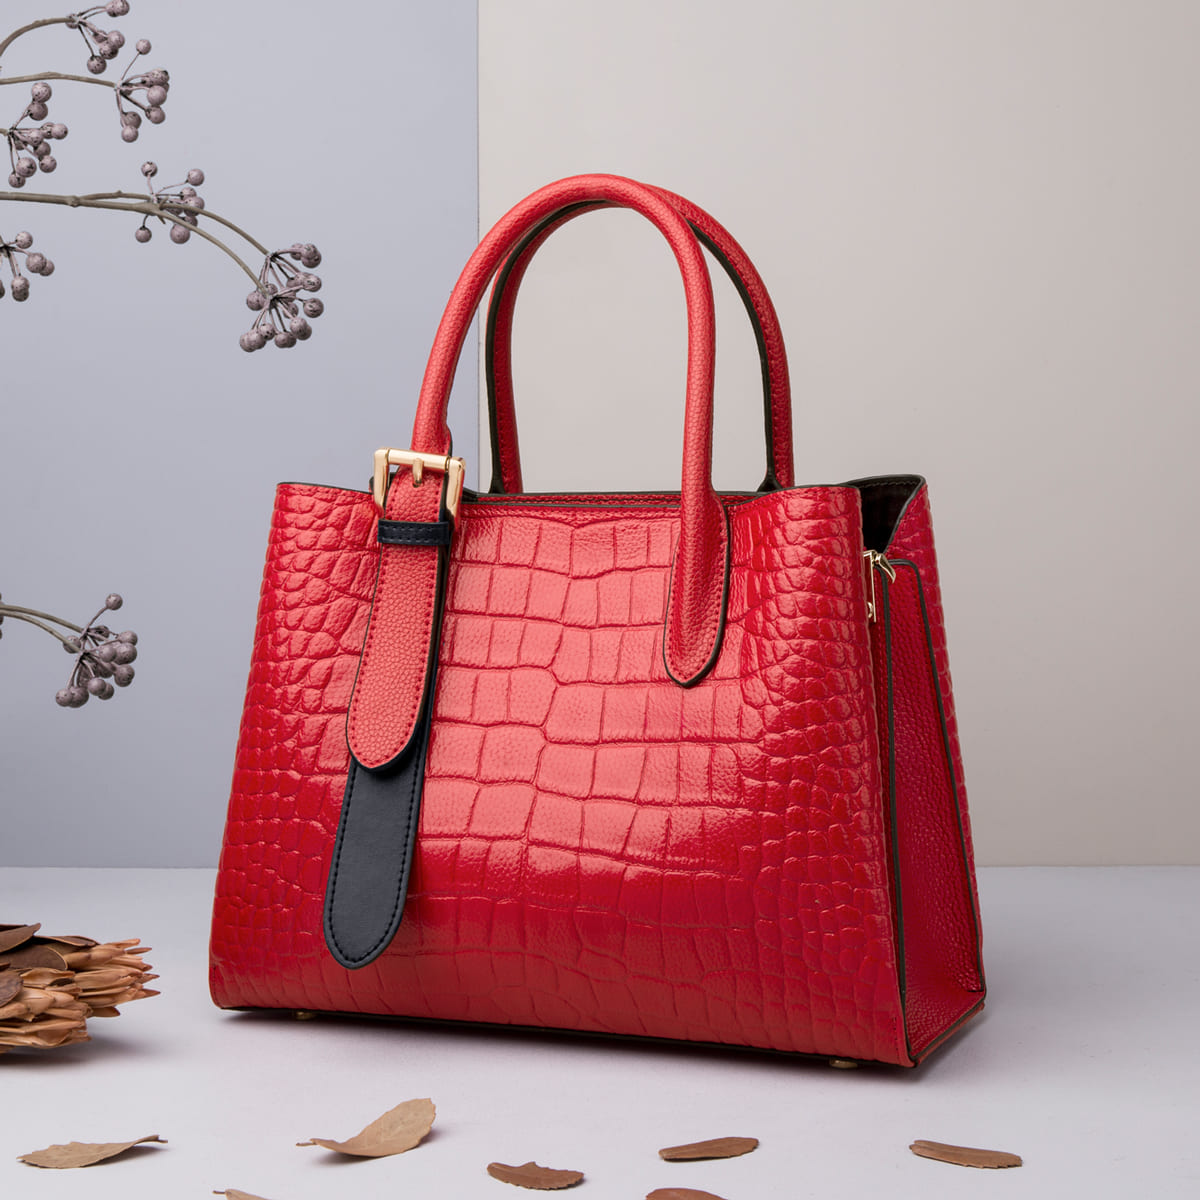 Shoulder bag with crocodile print and logo Woman, Red